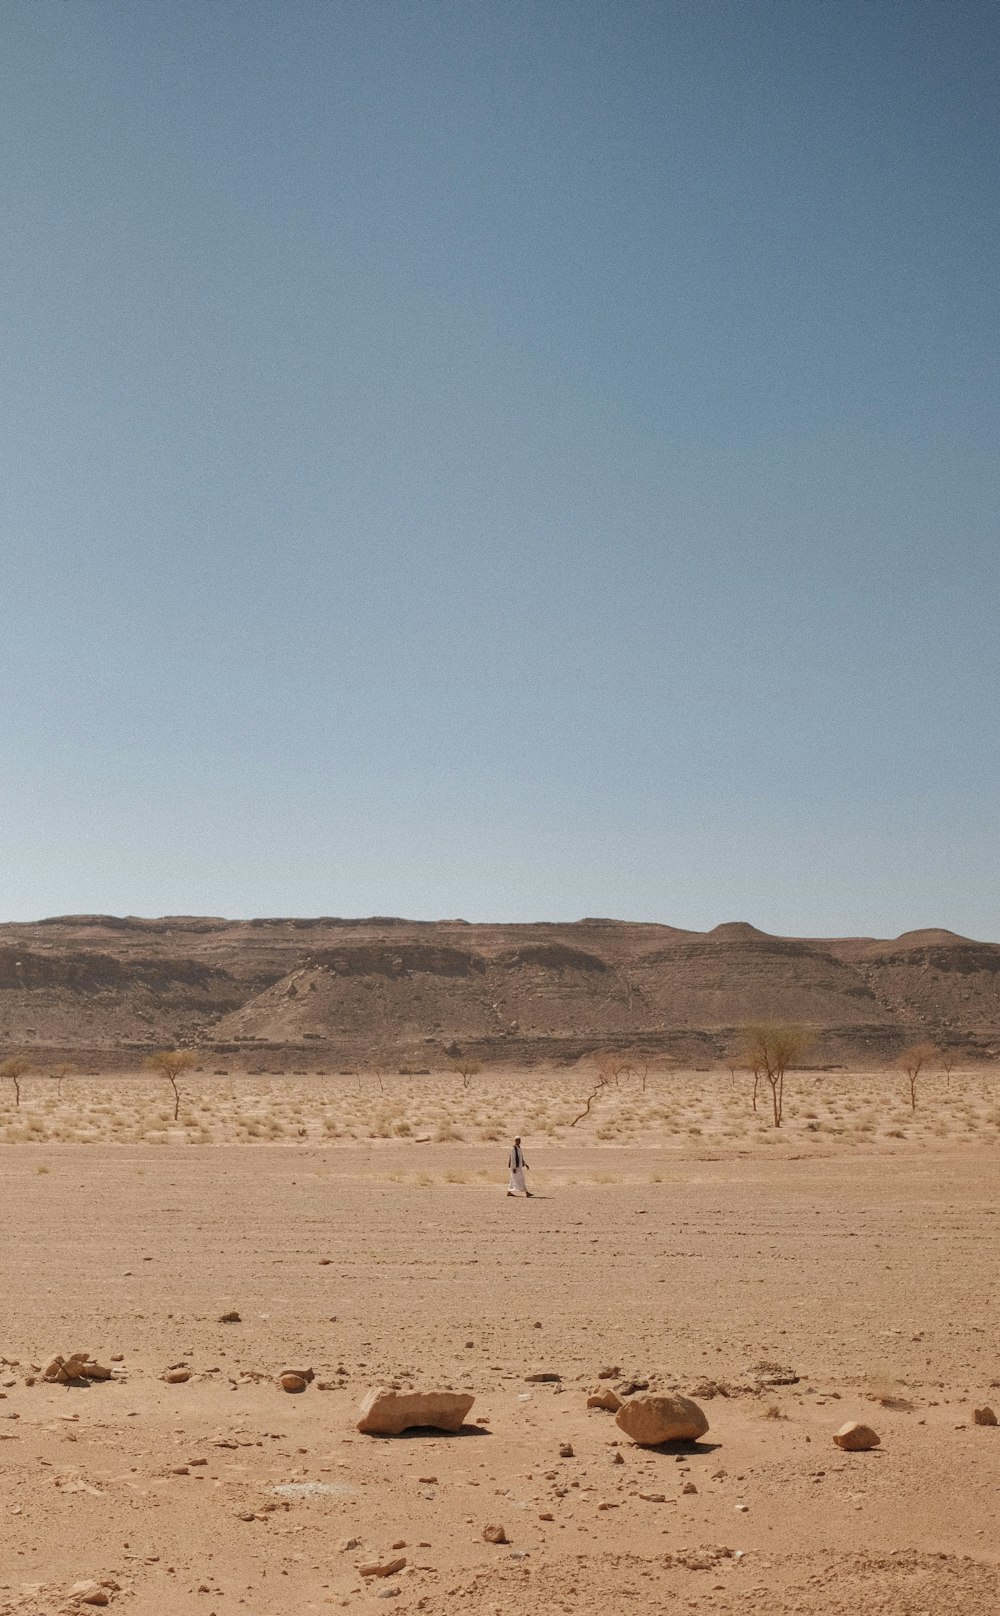 a person is flying a kite in the desert